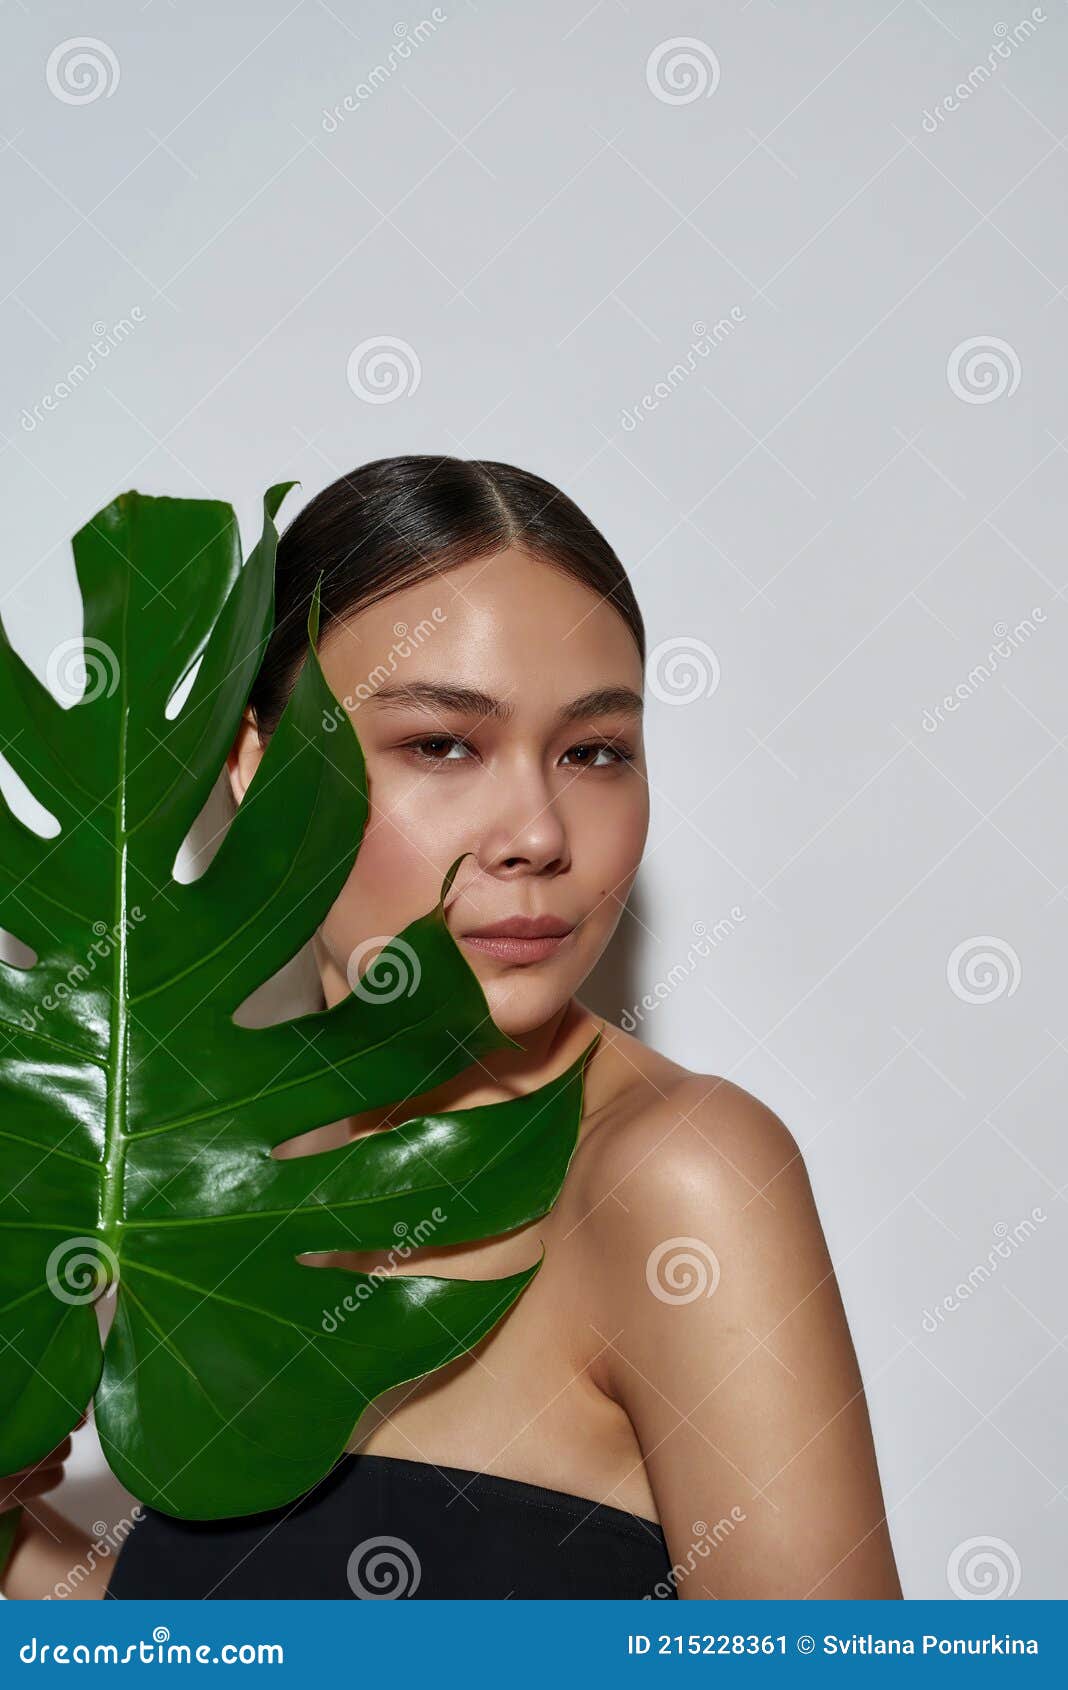 Top Asian Girls Nude - Portrait of a Young Magnificent Half-naked Asian Girl in a Black Top Hiding  Under a Monstera Leaf Stock Image - Image of color, girl: 215228361